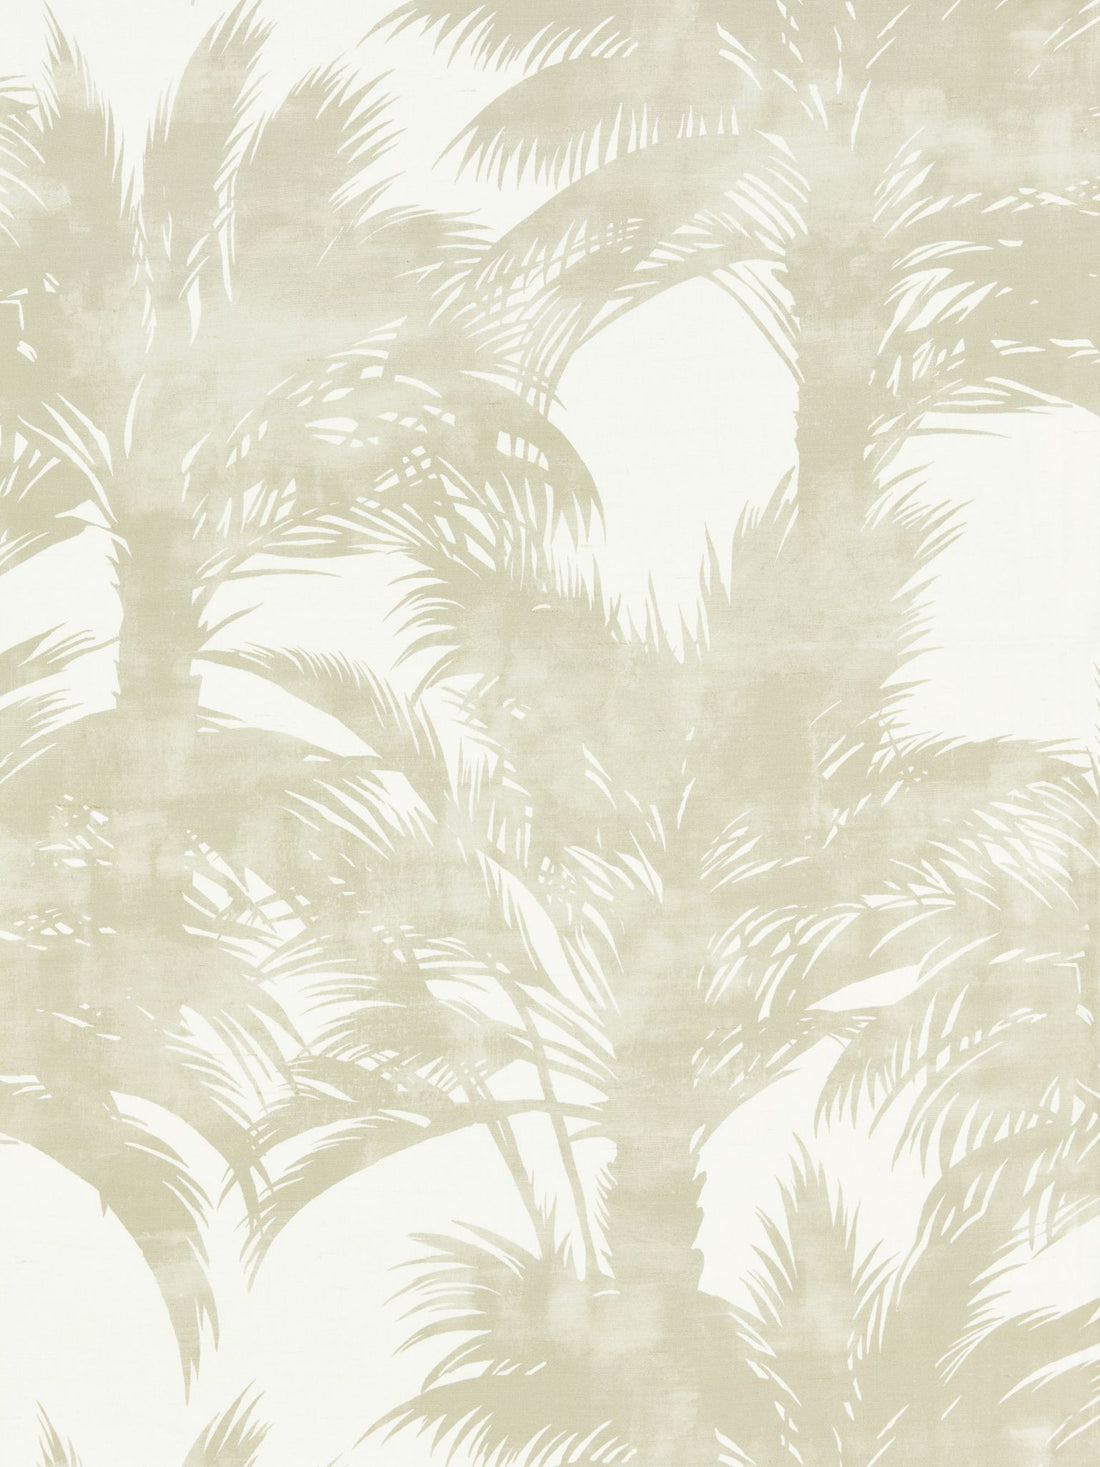 Palm Print fabric in sand color - pattern number GW 000116610 - by Scalamandre in the Grey Watkins collection